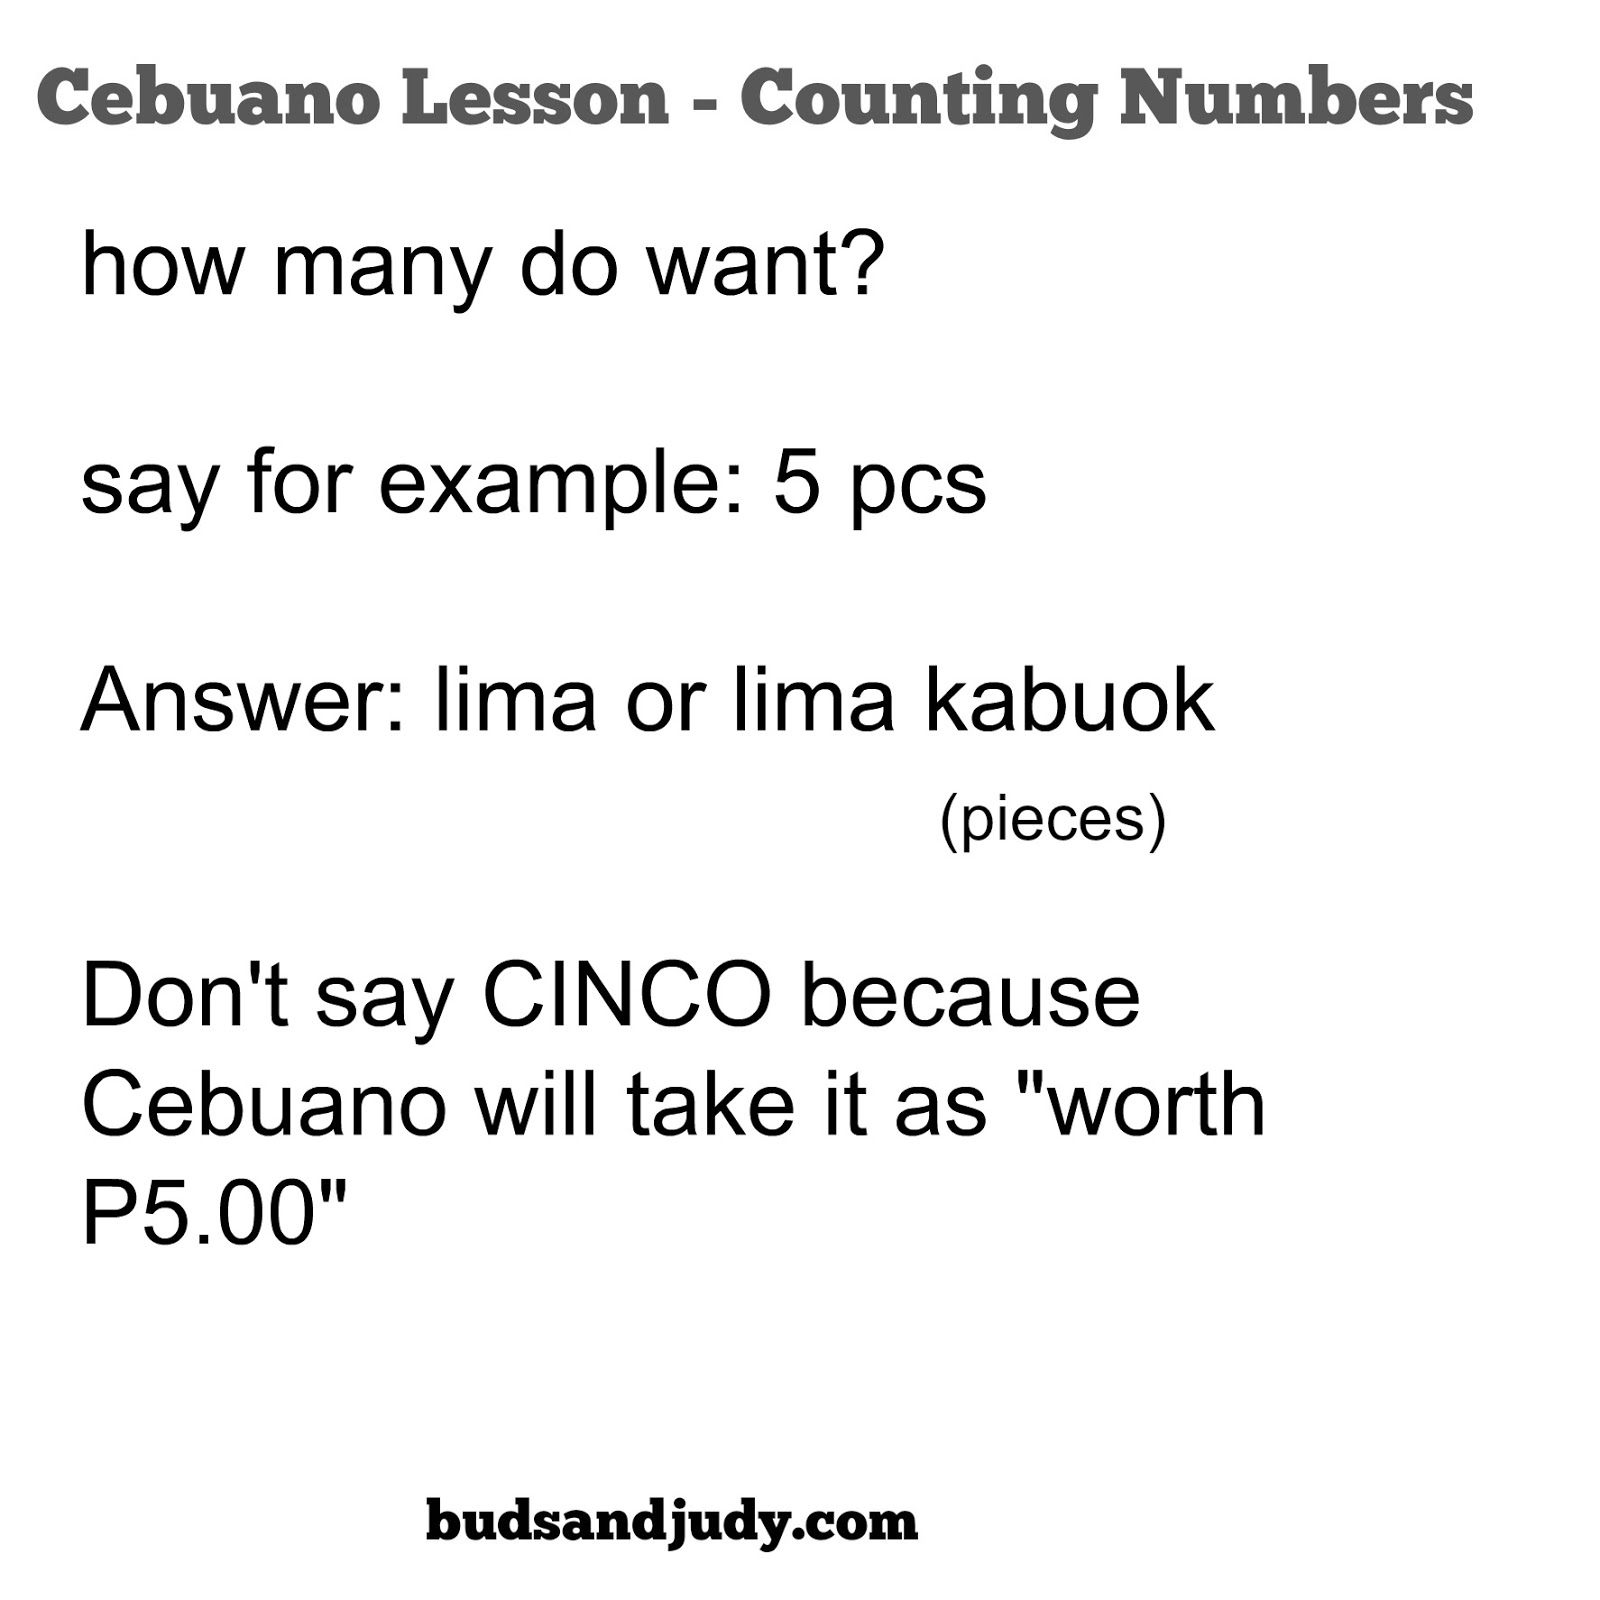 cebuano101-how-to-count-numbers-in-bisaya-or-cebuano